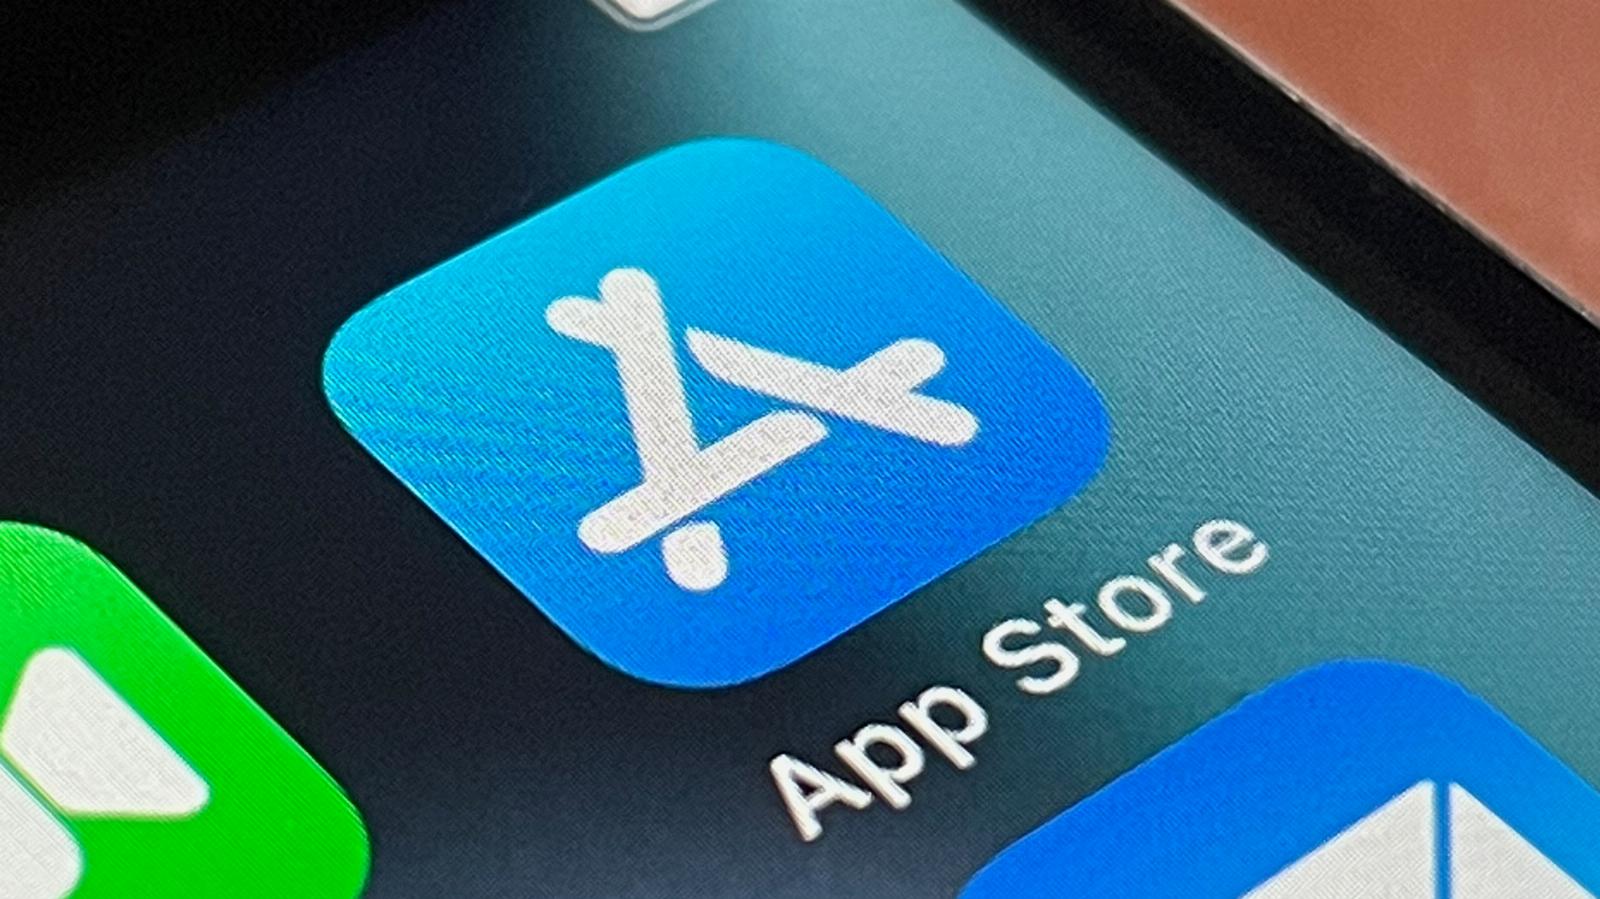 Study says App Store revenue of small developers grew by 71% in last two years